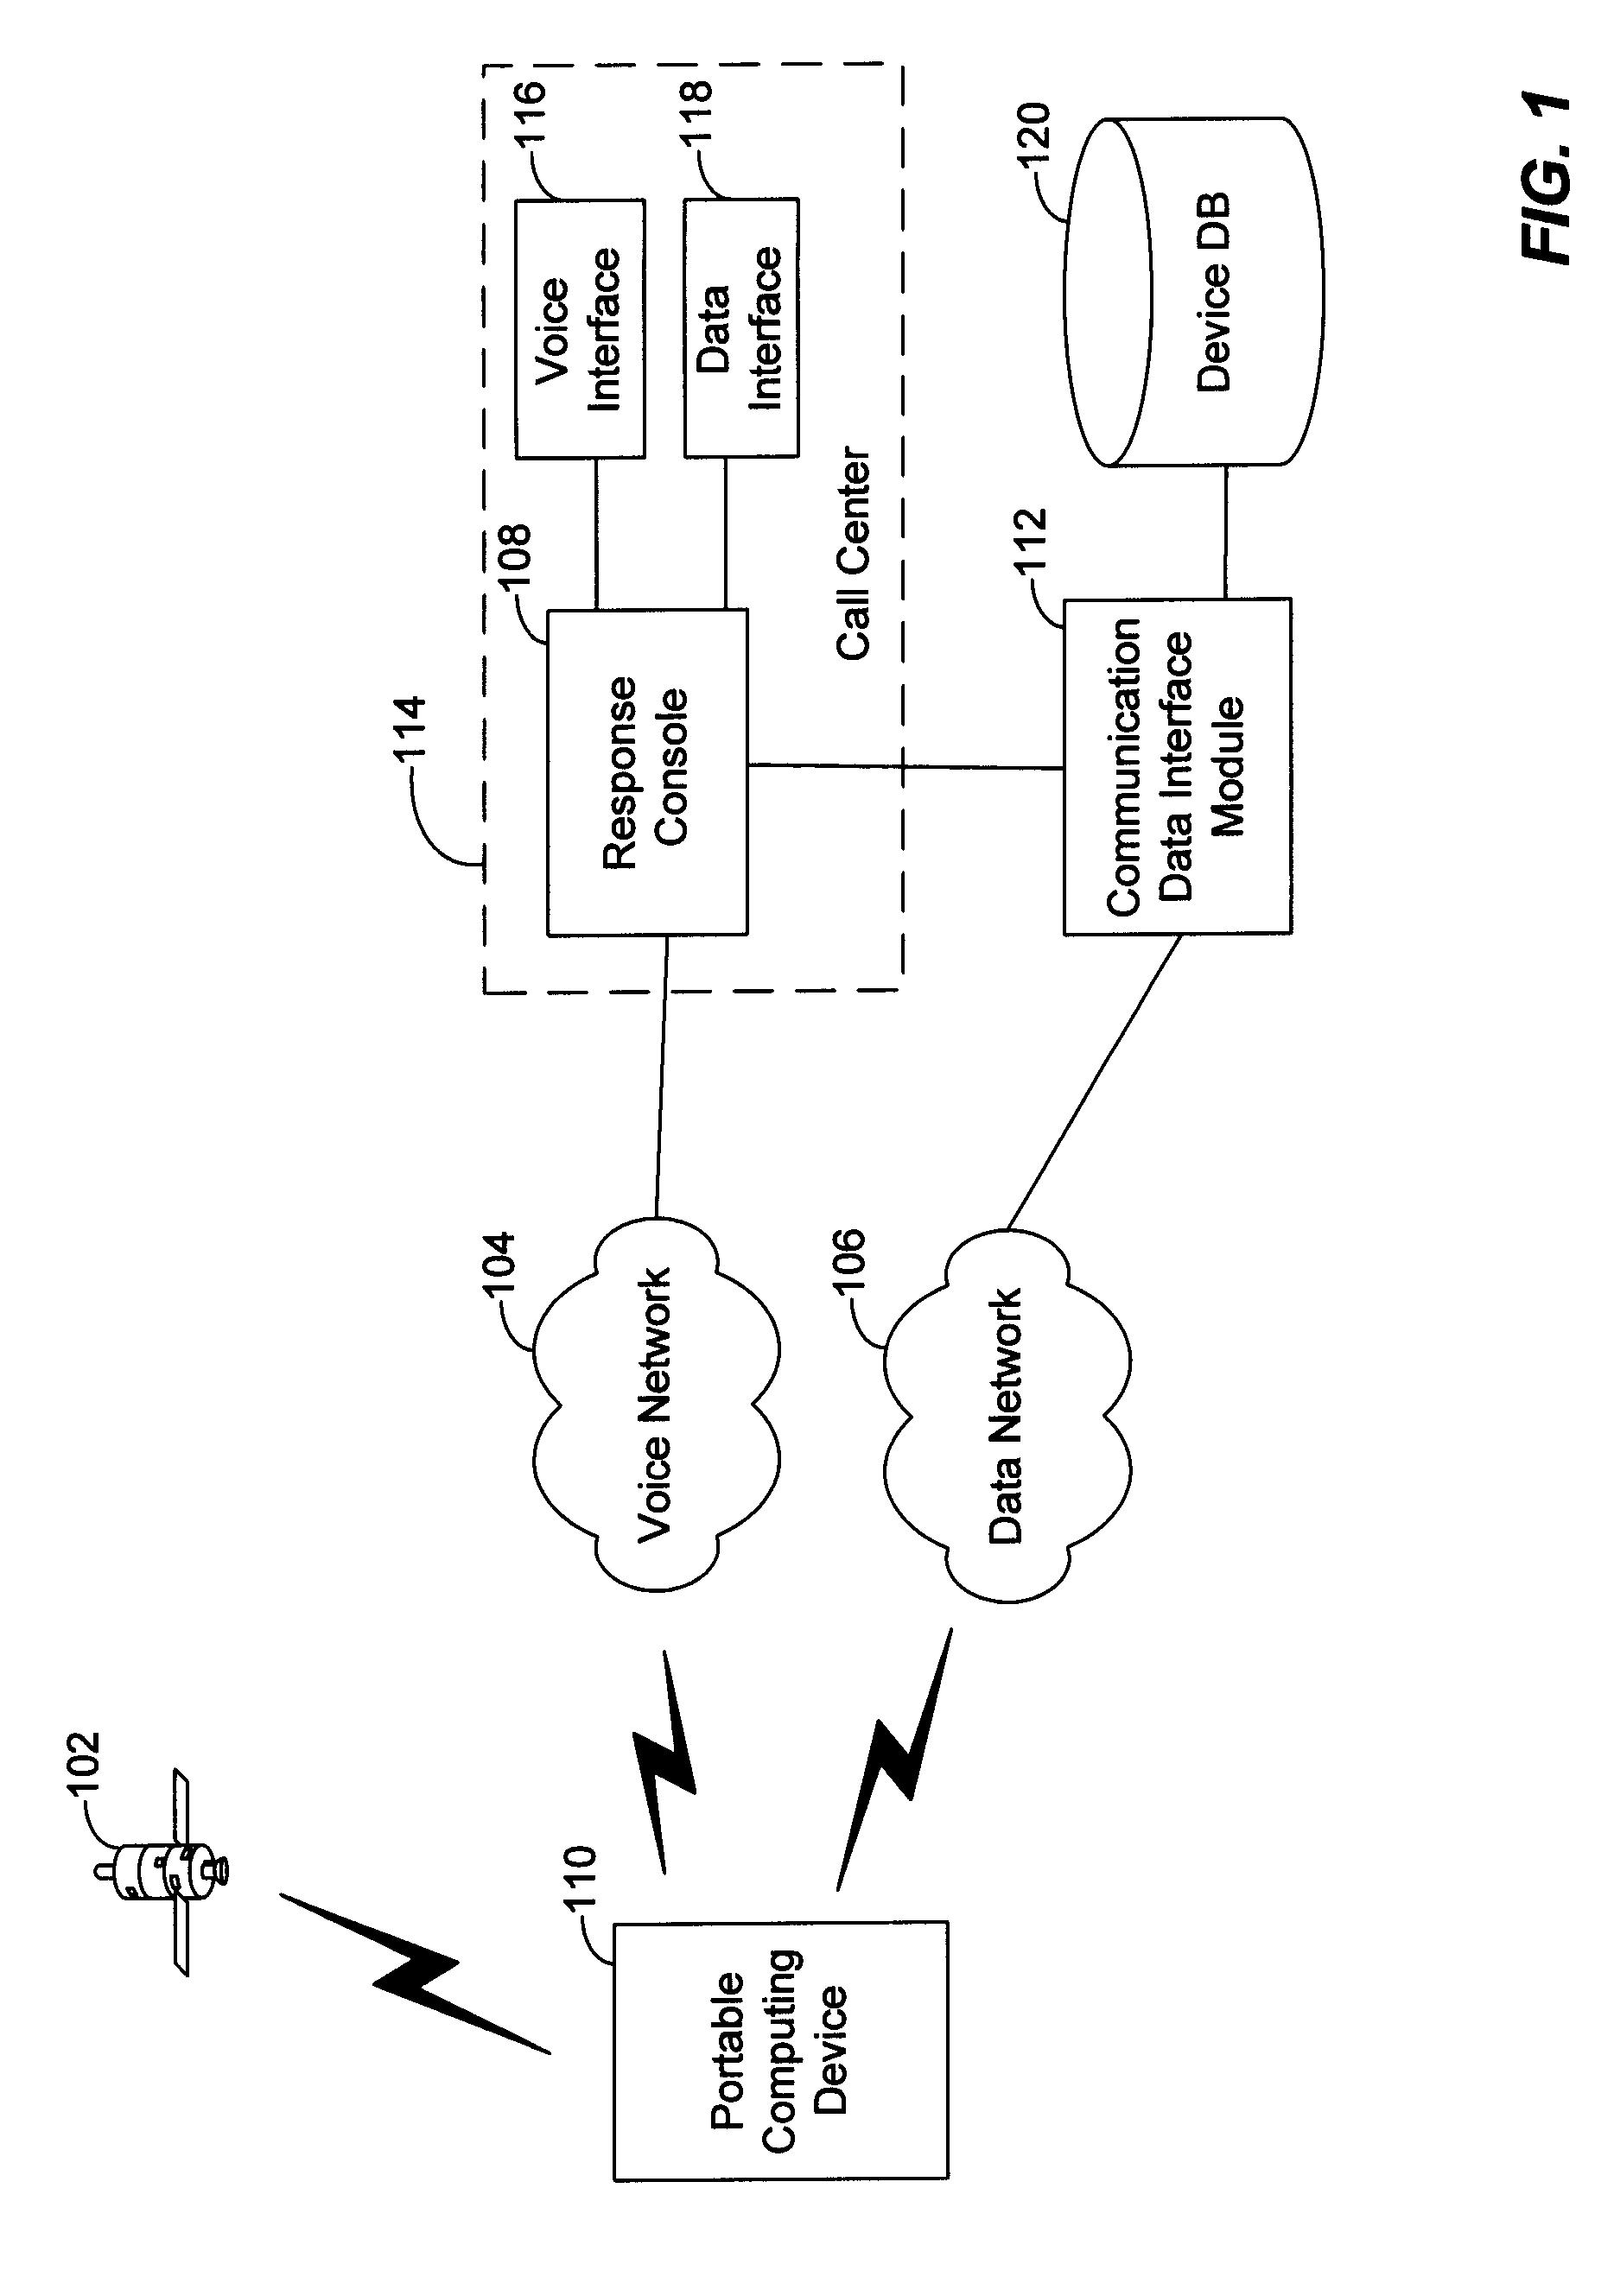 Method and system for initiating and handling an emergency call utilizing geographical zones